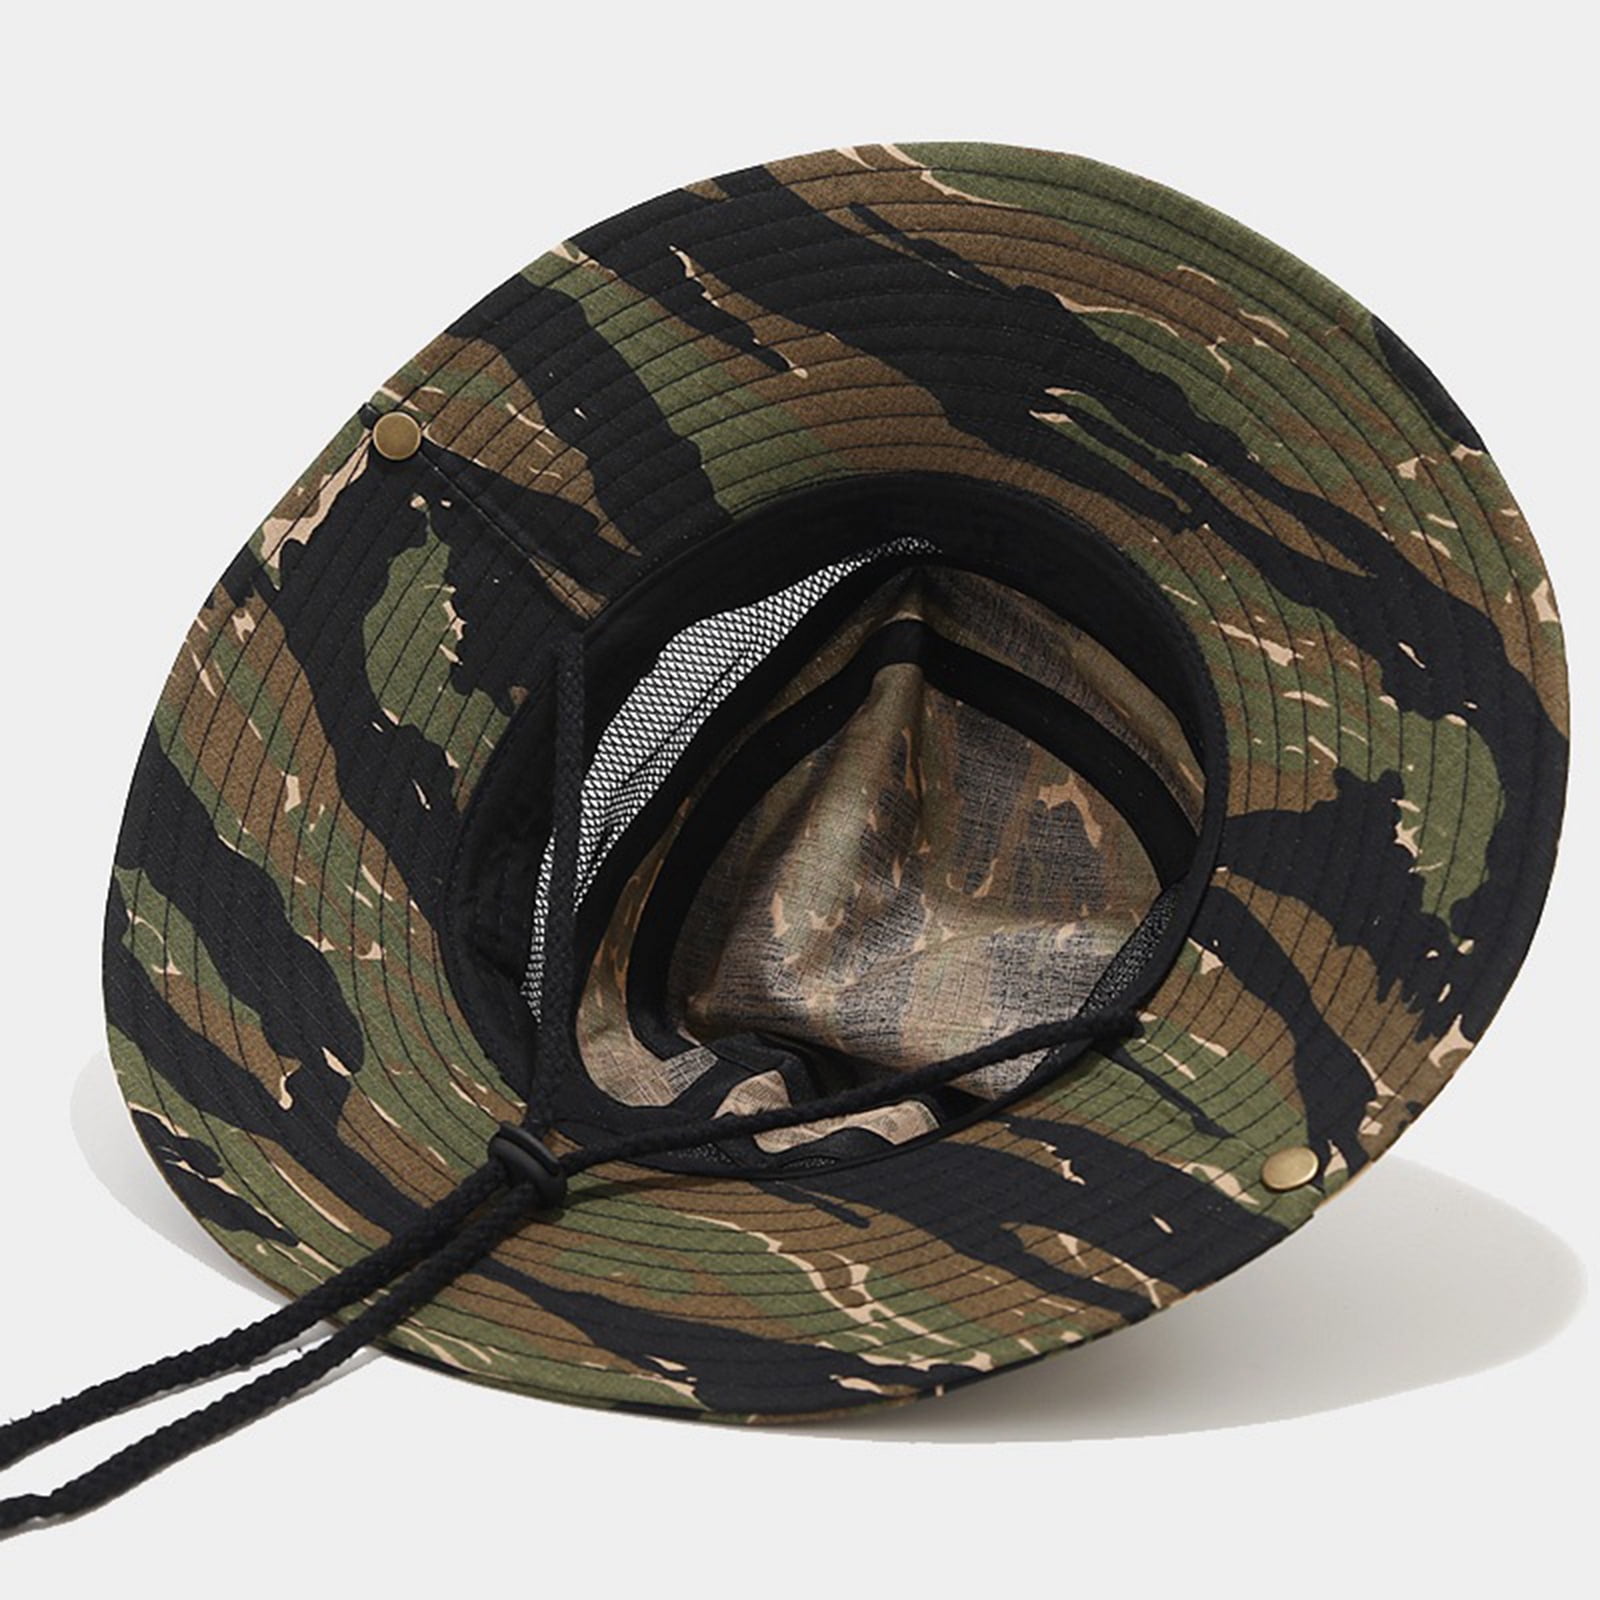 WEAIXIMIUNG Bucket Hat Cute Aesthetic Camouflage Breathable Wide Brim  Boonie Hat Outdoor Mesh Cap for Travel Fishing Black